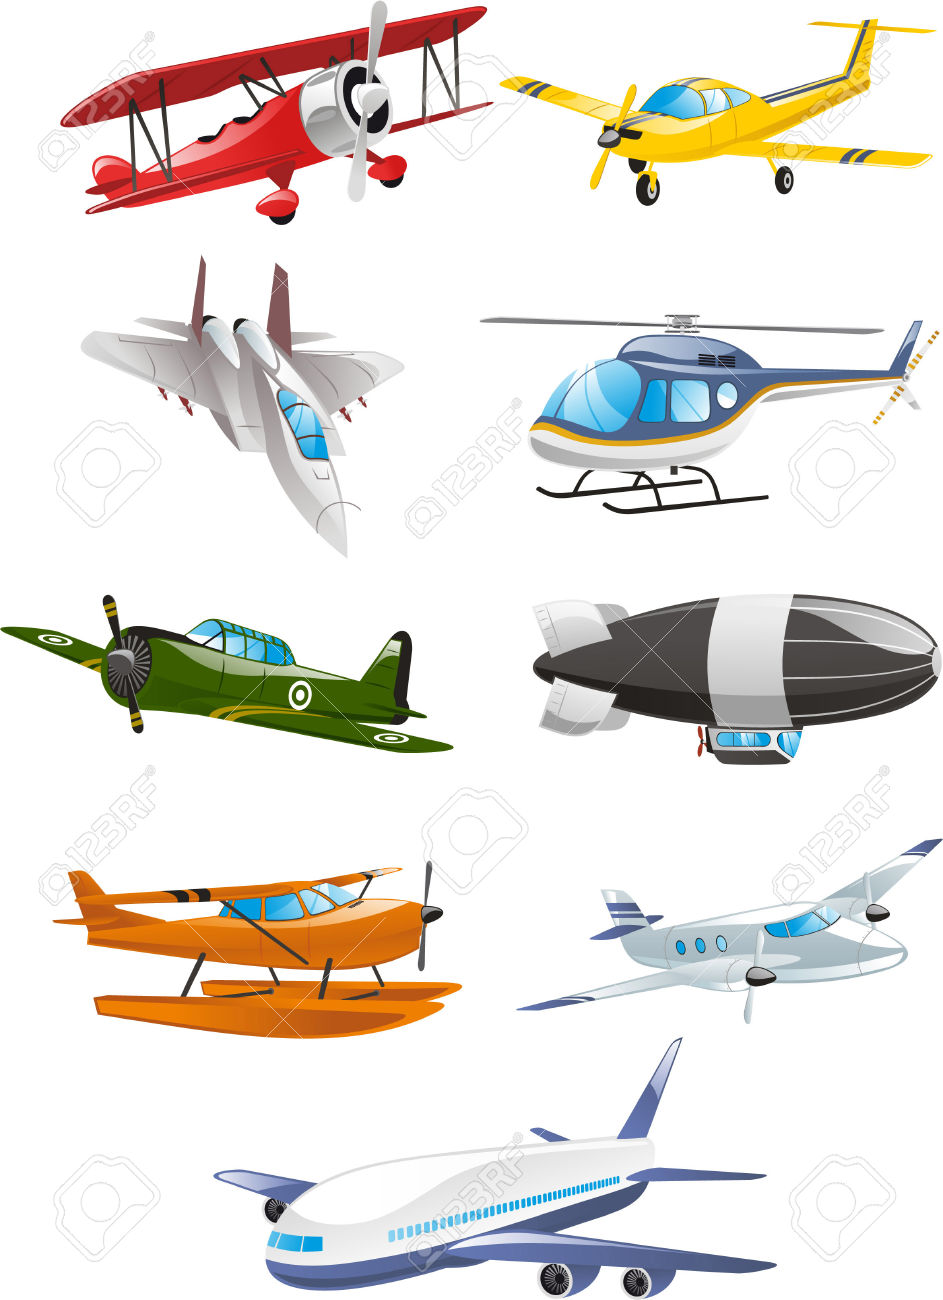 Airplane Collection, With Aircraft, Airbus, Airliner, Large.